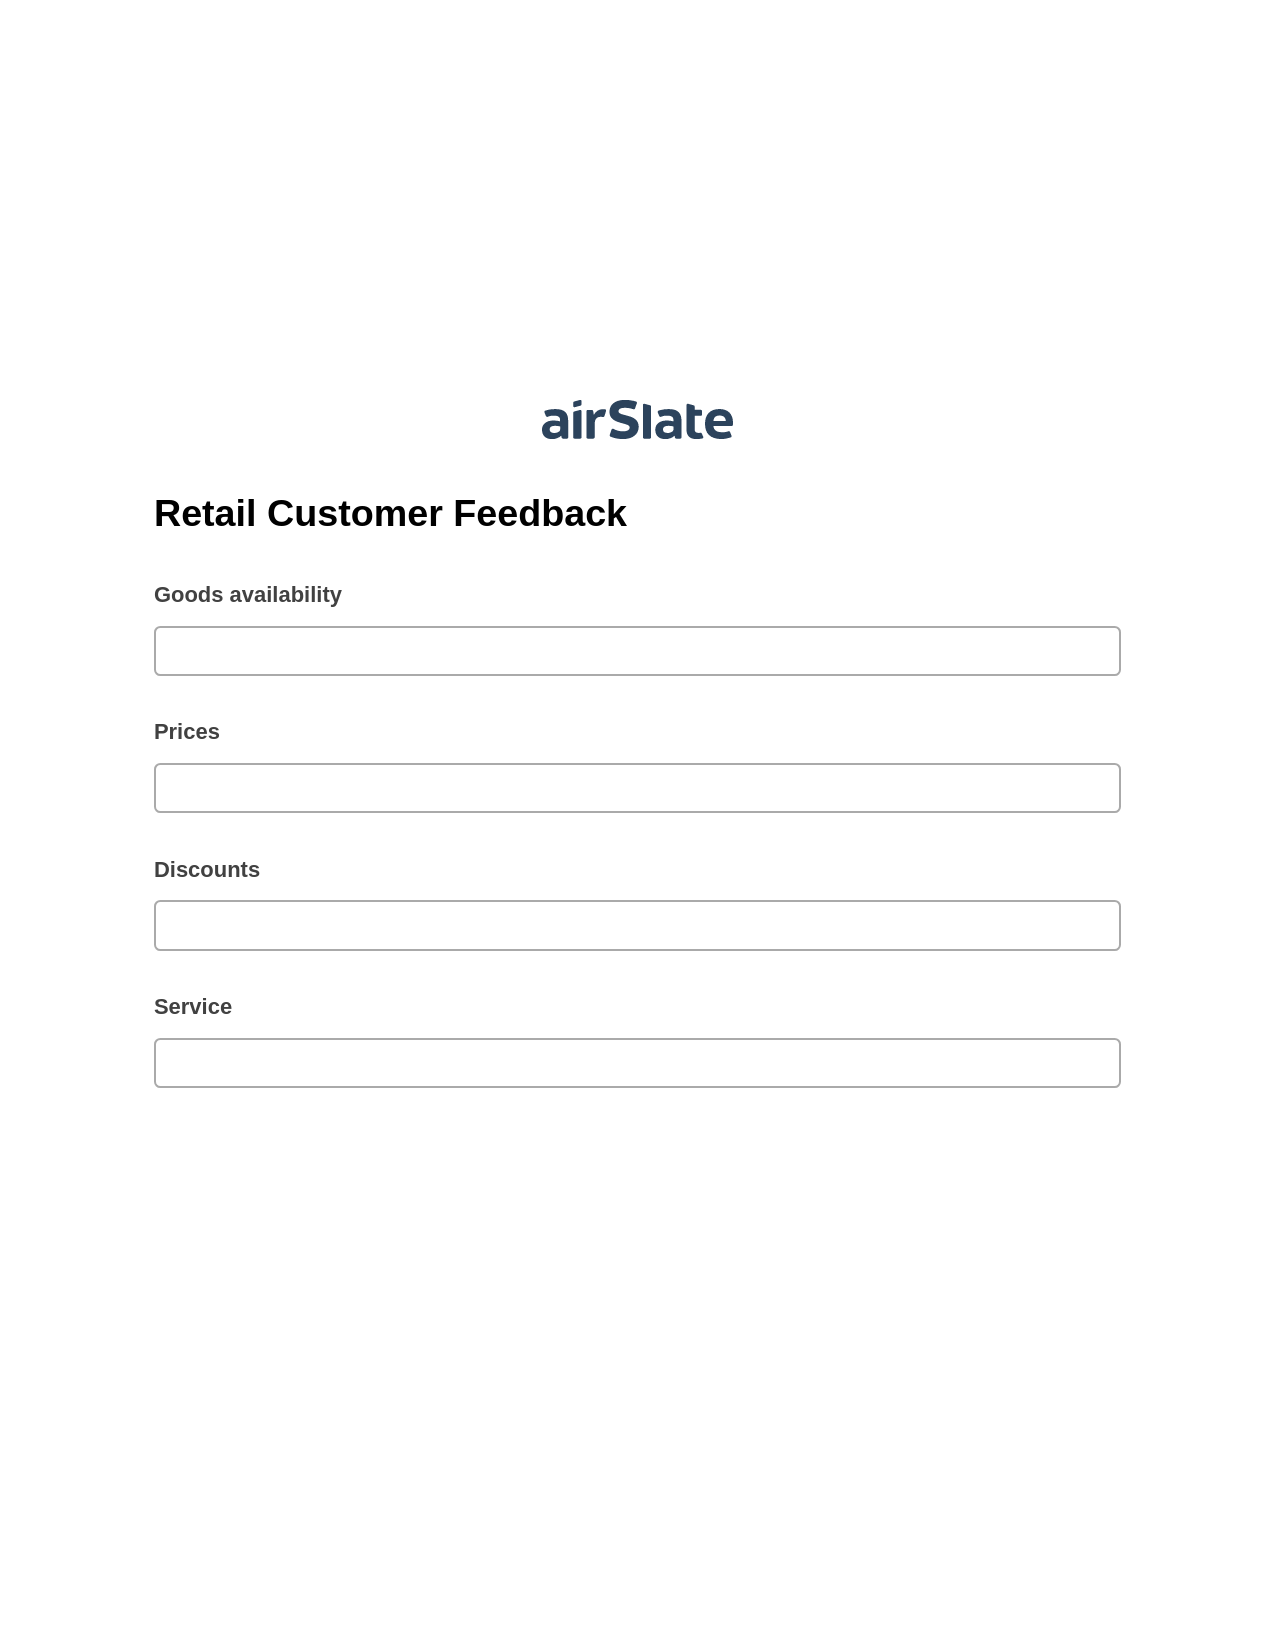 Multirole Retail Customer Feedback Pre-fill Dropdowns from Google Sheet Bot, Export to MS Dynamics 365 Bot, Post-finish Document Bot